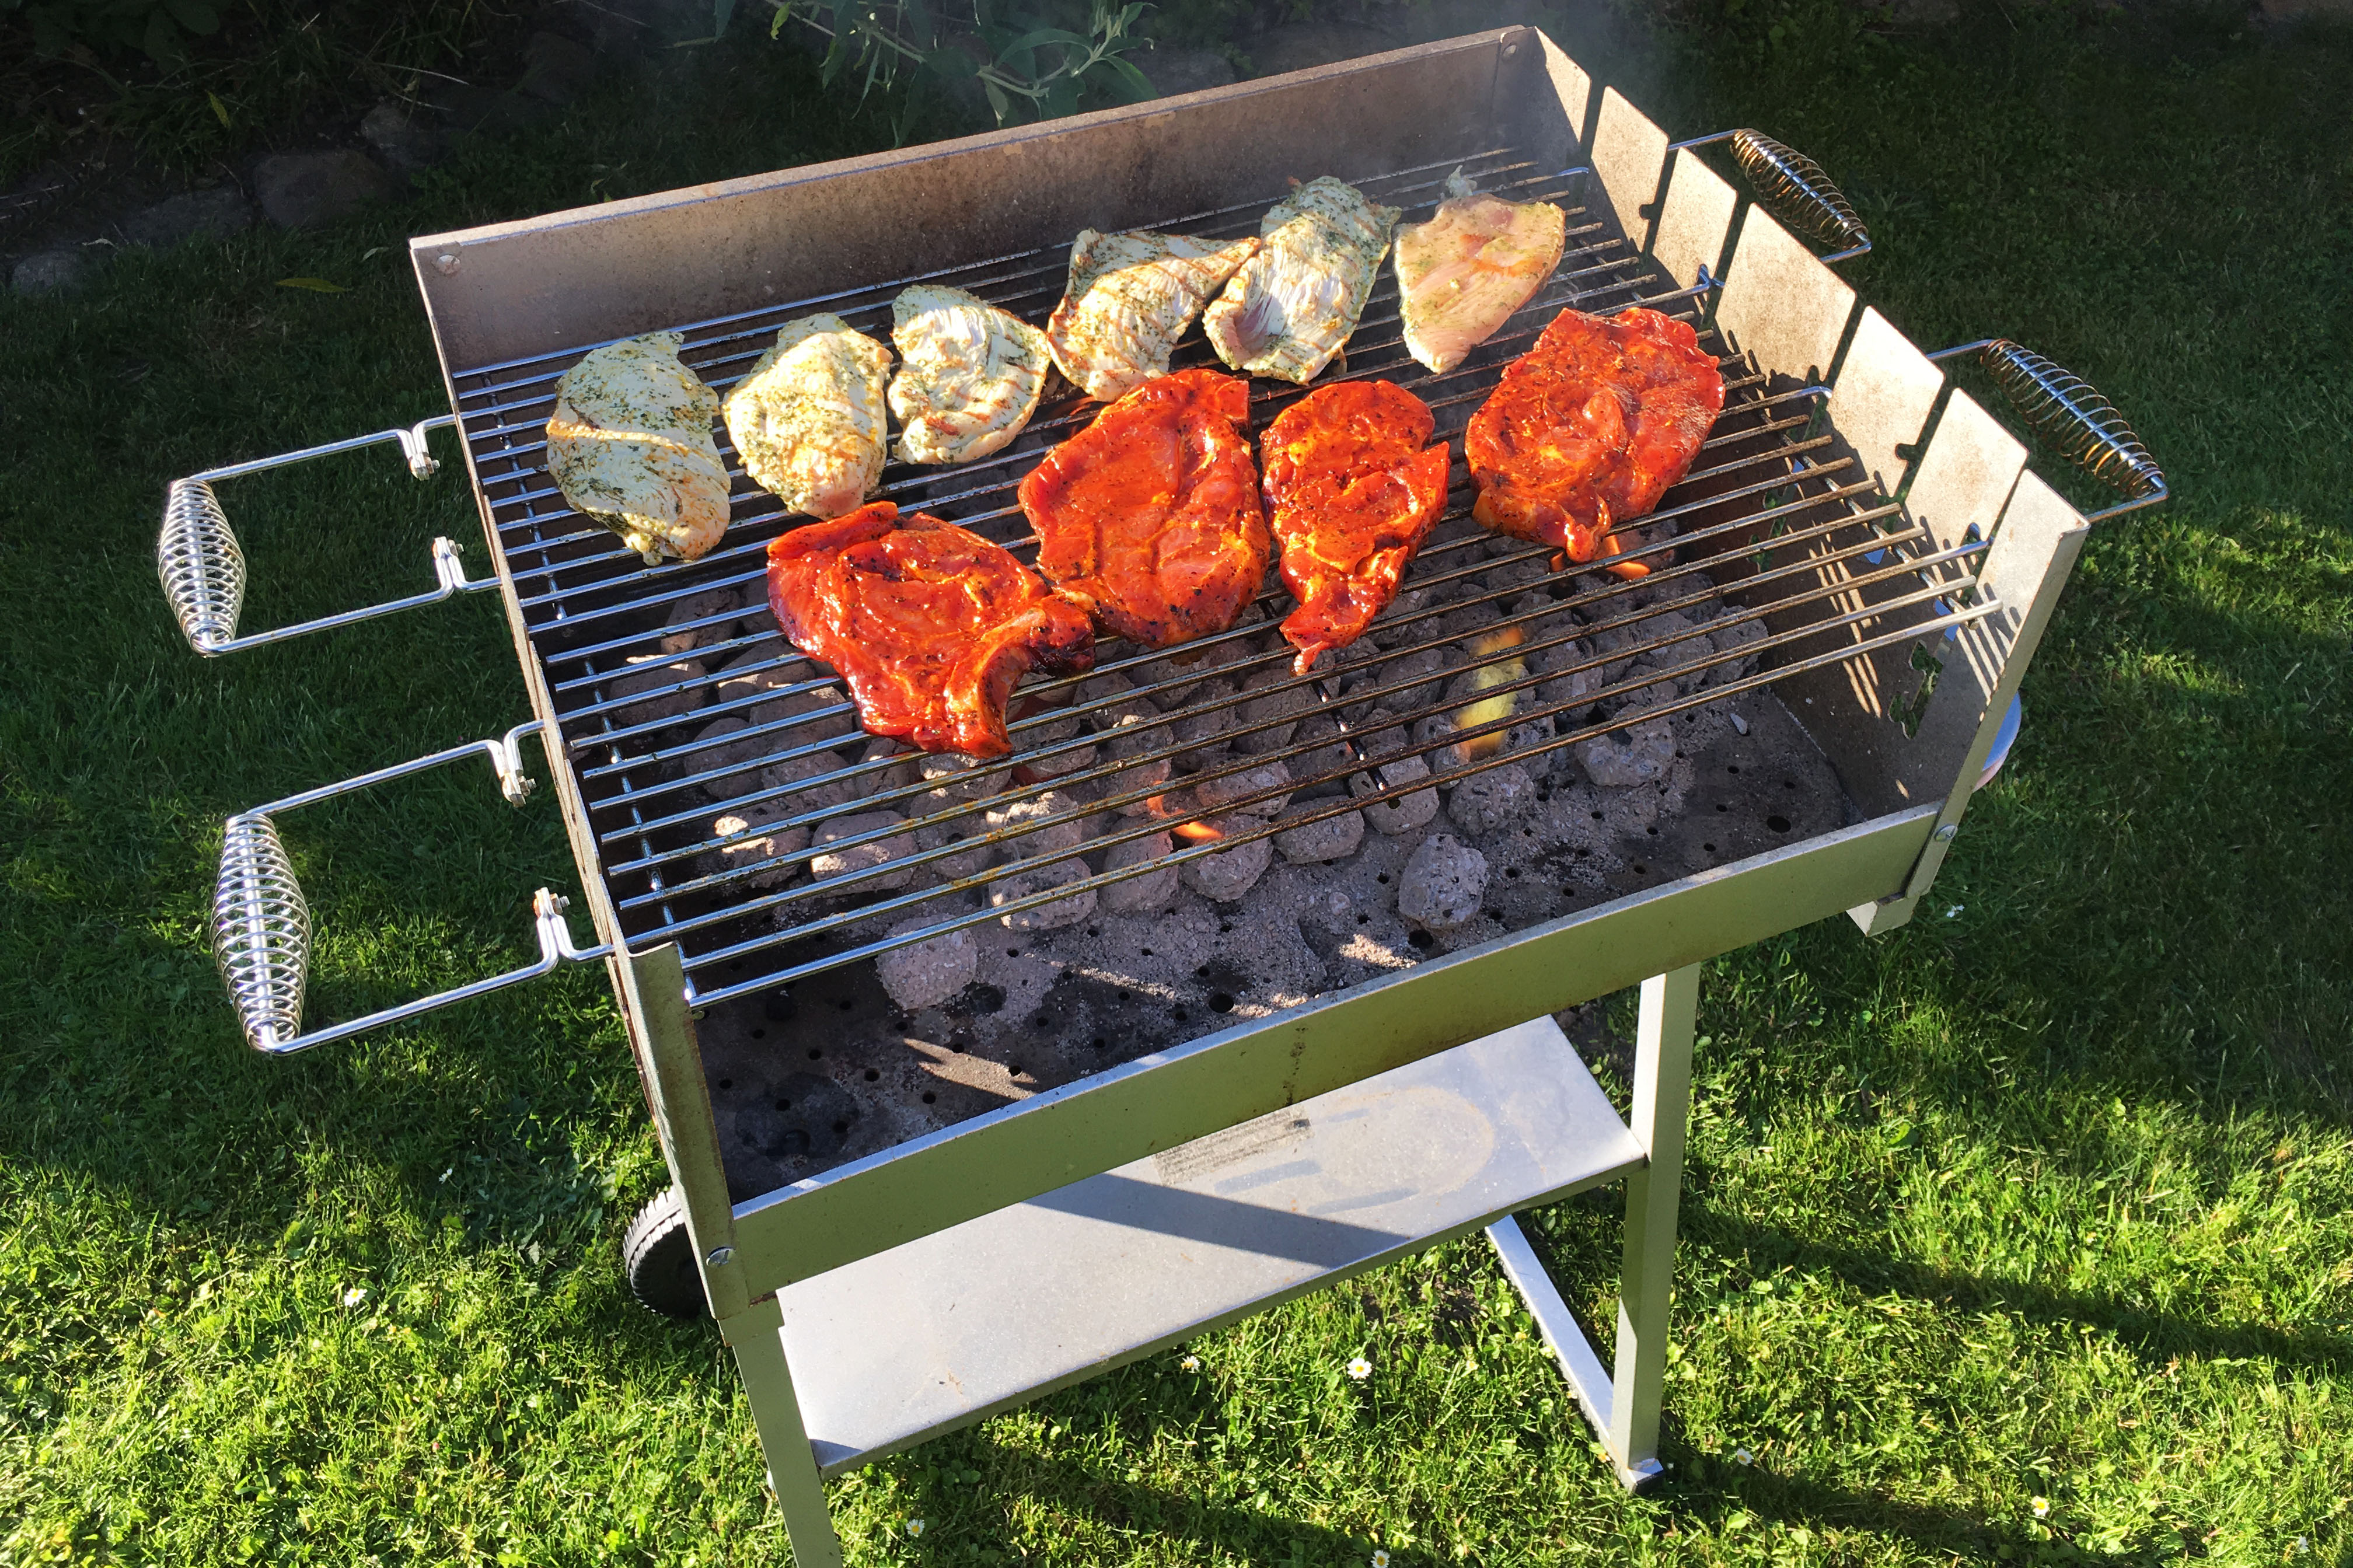 Grill Buying Guide